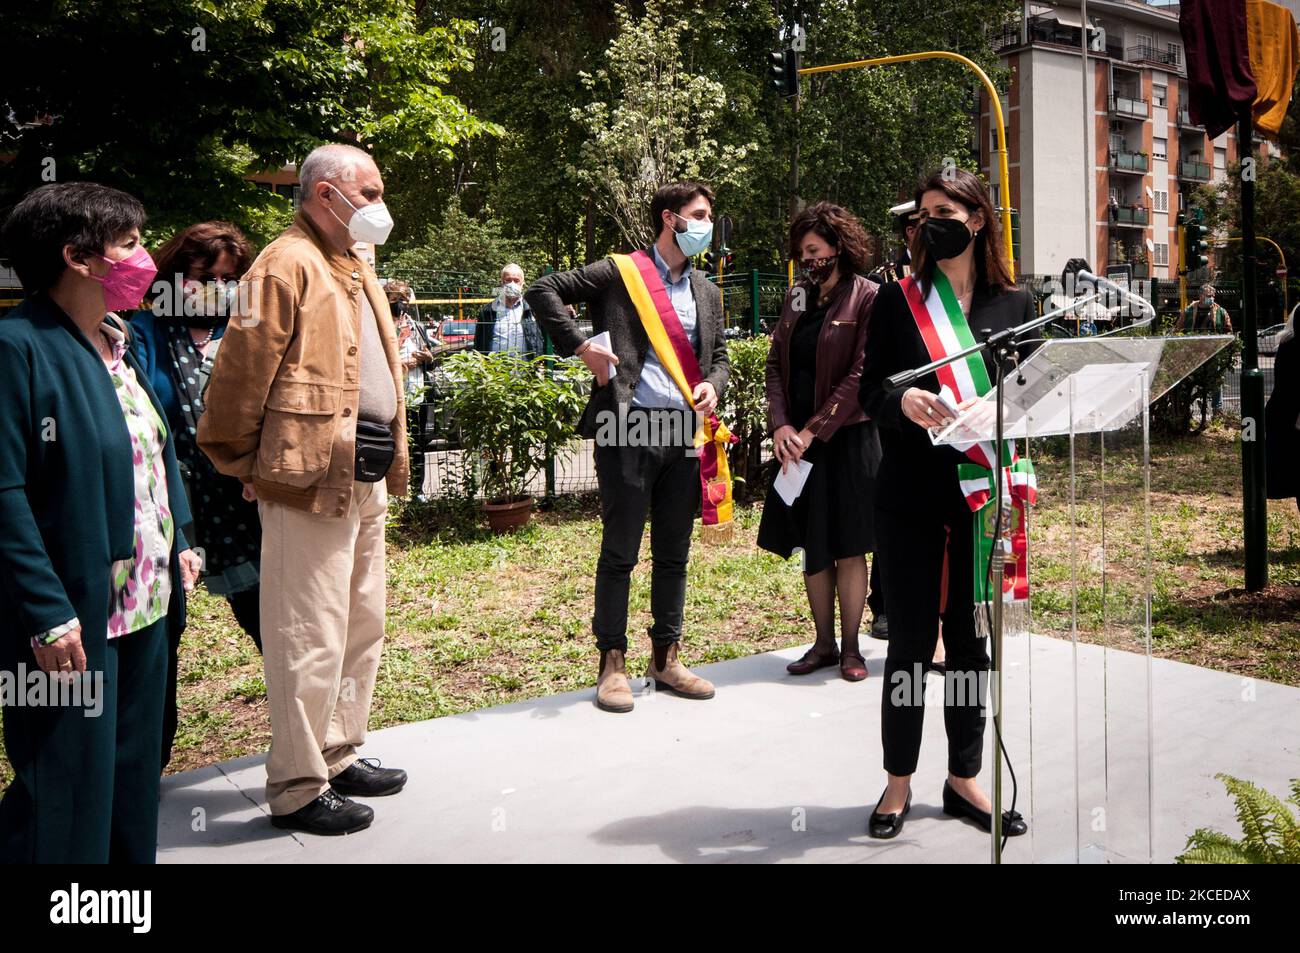 Rome's Mayor Virginia Raggi Virginia, Amedeo Ciaccheri and Roberto Colasanti during the ceremony of inauguration park in memory of Donatella Colasanti in her neighbourhood, San Paolo. Almost 46 years after the Circeo massacre, of which she was the only survivor and which marked her life forever, her brother Roberto unveiled the plaque - 'Donatella Colasanti, fighter for justice' - in the city park between Viale Giustiniano Imperatore and Via della Villa di Lucina. On May 12, 2021 in Rome, Italy (Photo by Andrea Ronchini/NurPhoto) Stock Photo